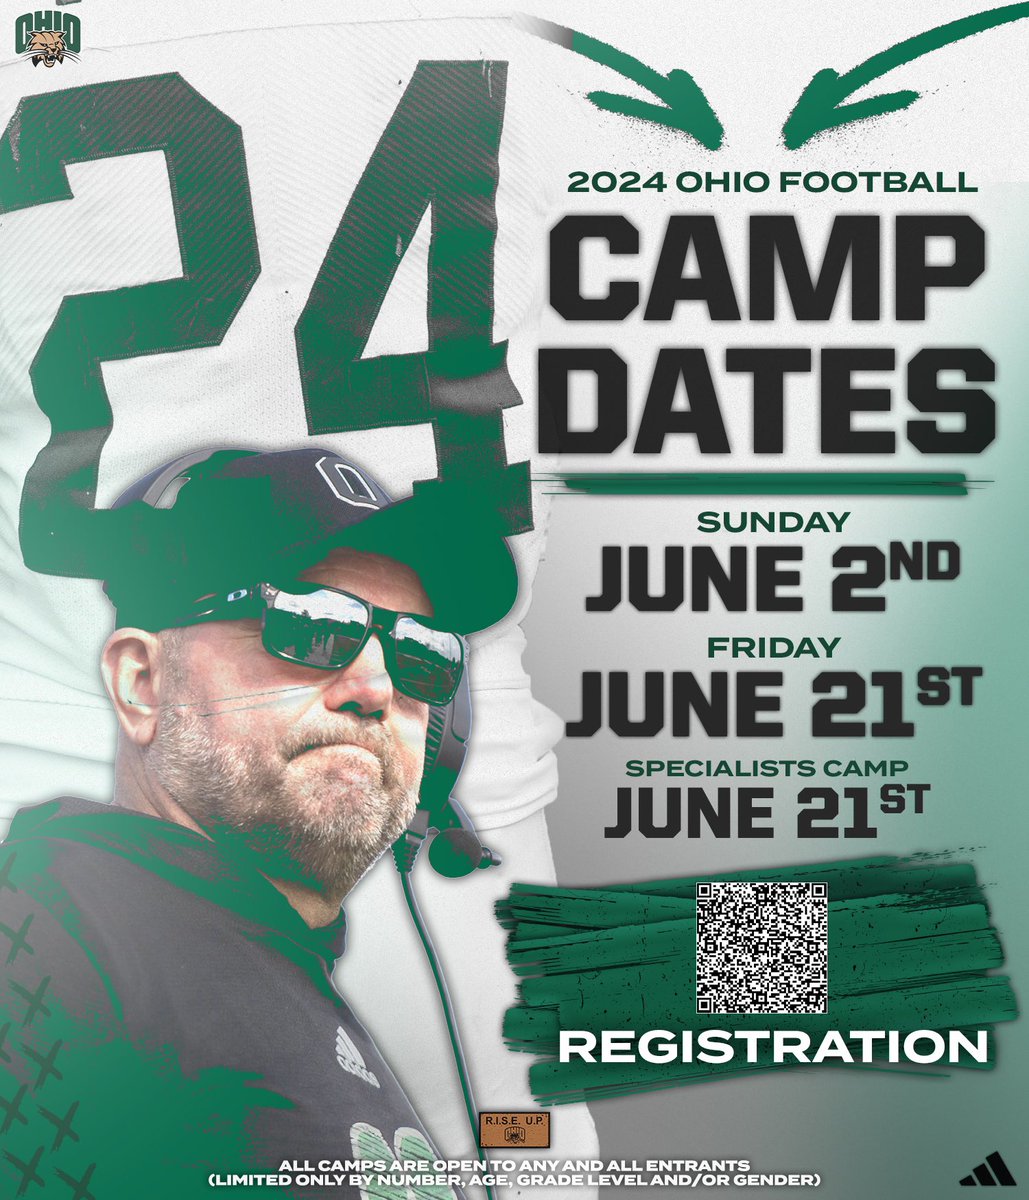 LAST CHANCE ‼️‼️

Registration for OUr first prospect camp on Sunday June 2nd ENDS TOMORROW NIGHT!! Do not miss the opportunity to compete in front of and learn from the best staff in the nation! 😼😼Register with the link below 👇 👇👇👇

tinyurl.com/yc47wtev